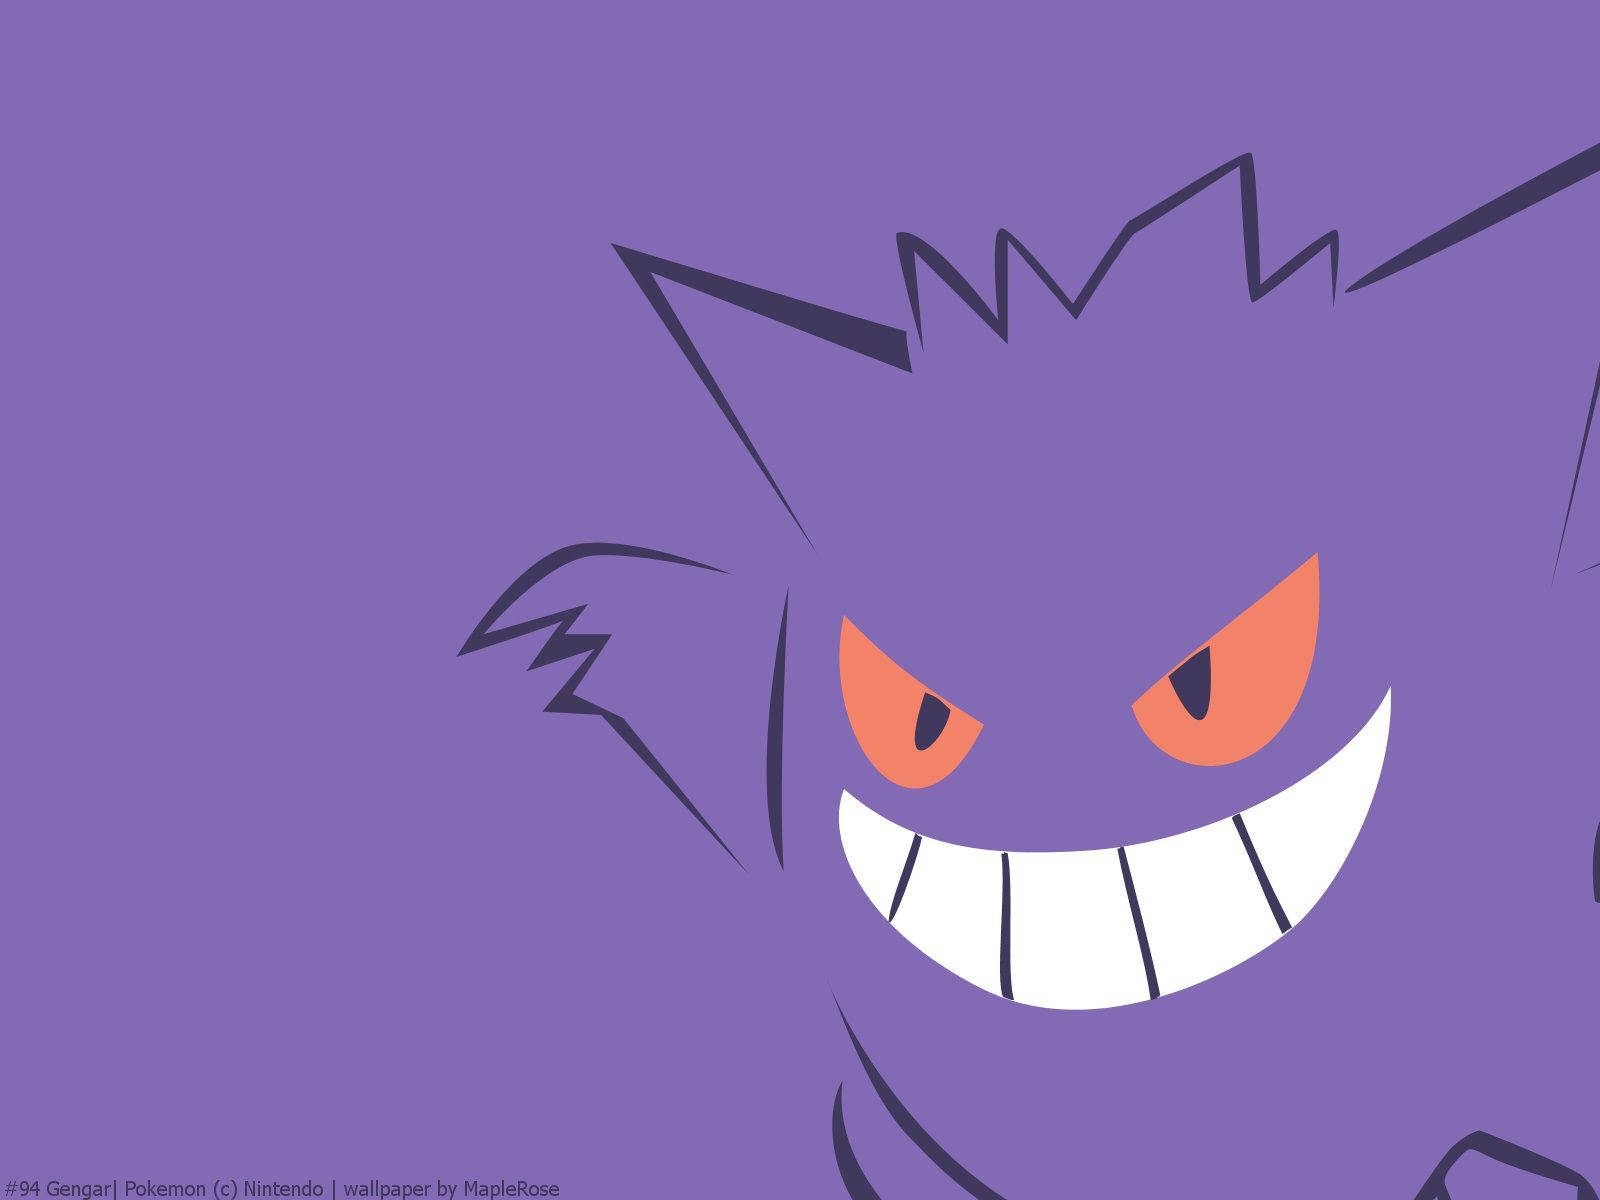 Show your Purple Power with the Minimalist Gengar Art Wallpaper